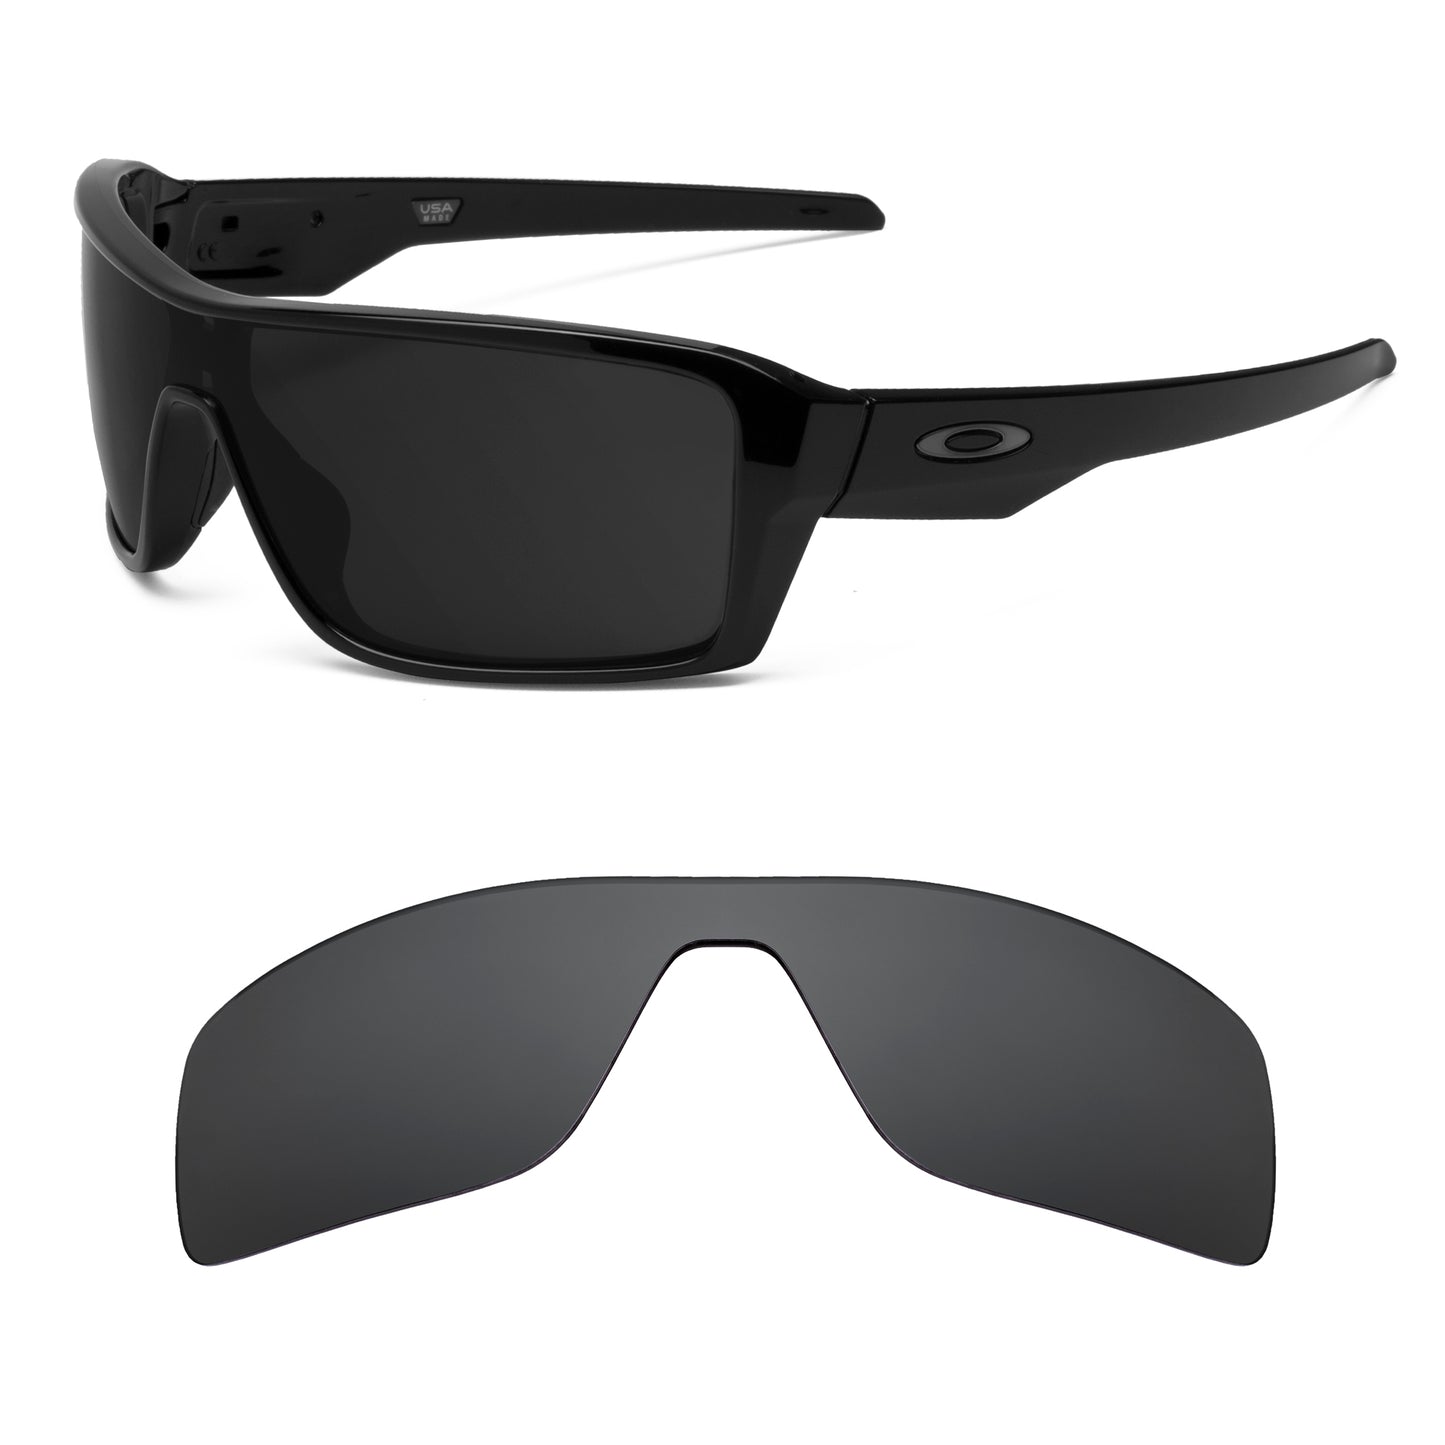 Oakley Ridgeline sunglasses with replacement lenses